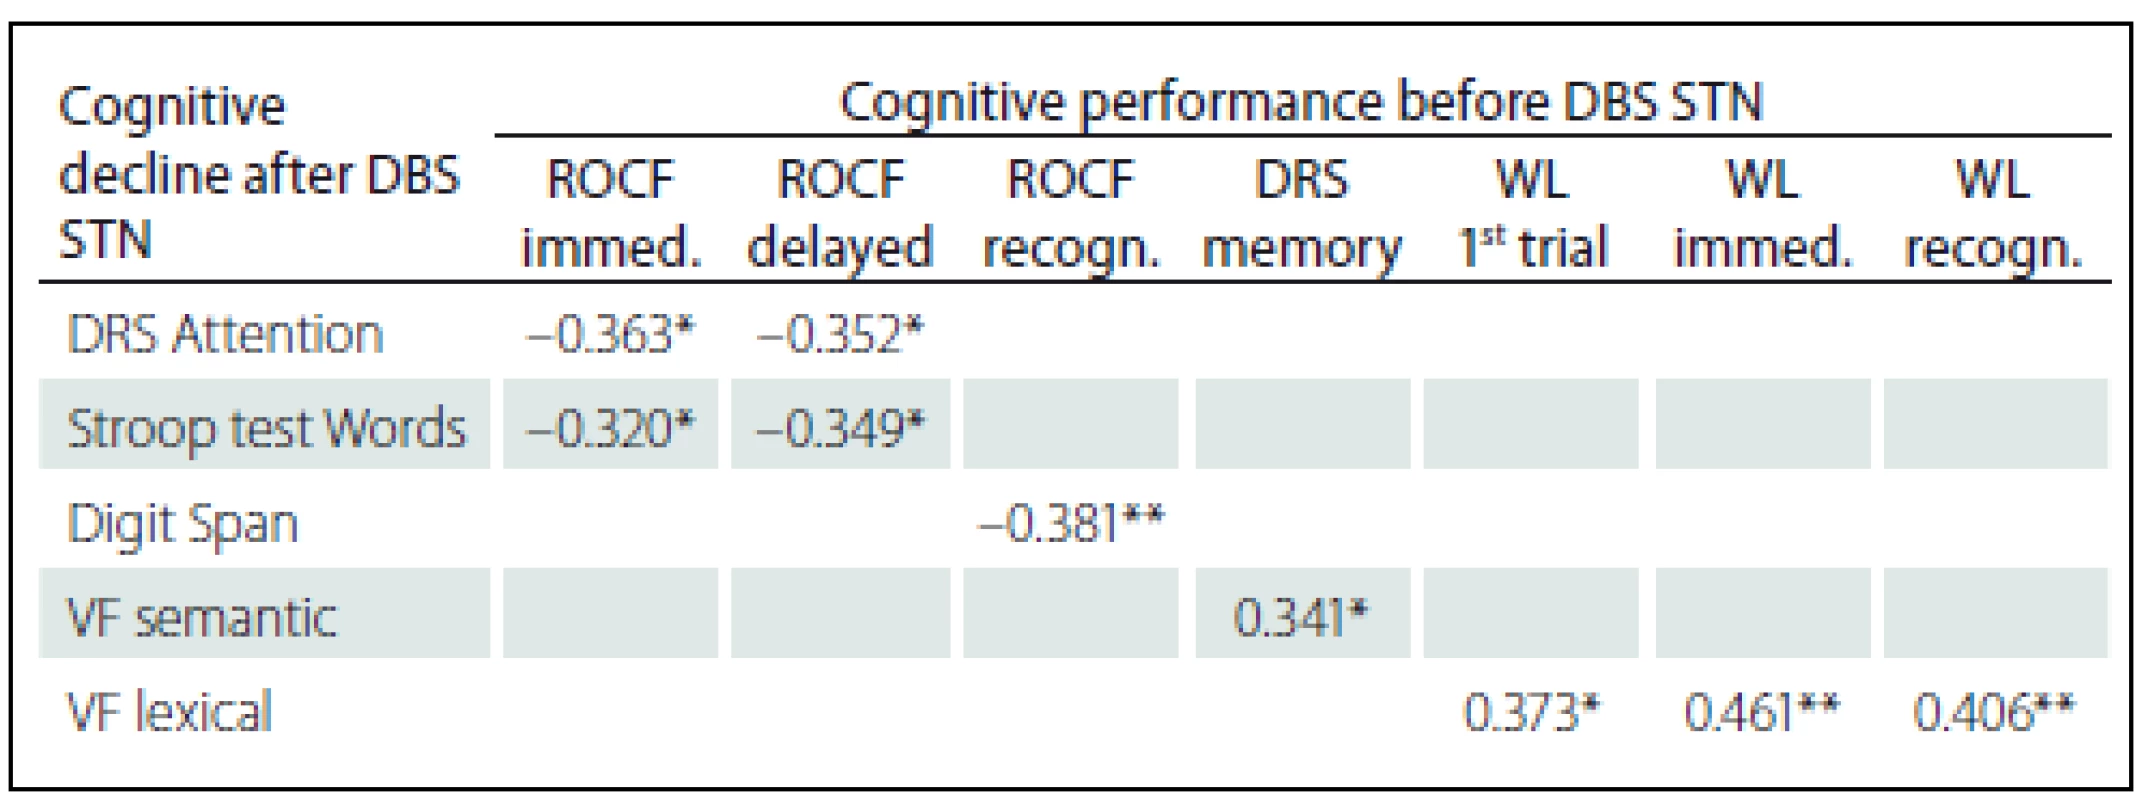 Statistically significant correlations between cognitive decline after DBS STN and cognitive performances before DBS STN (Spearman´s Rank-Order Correlation).